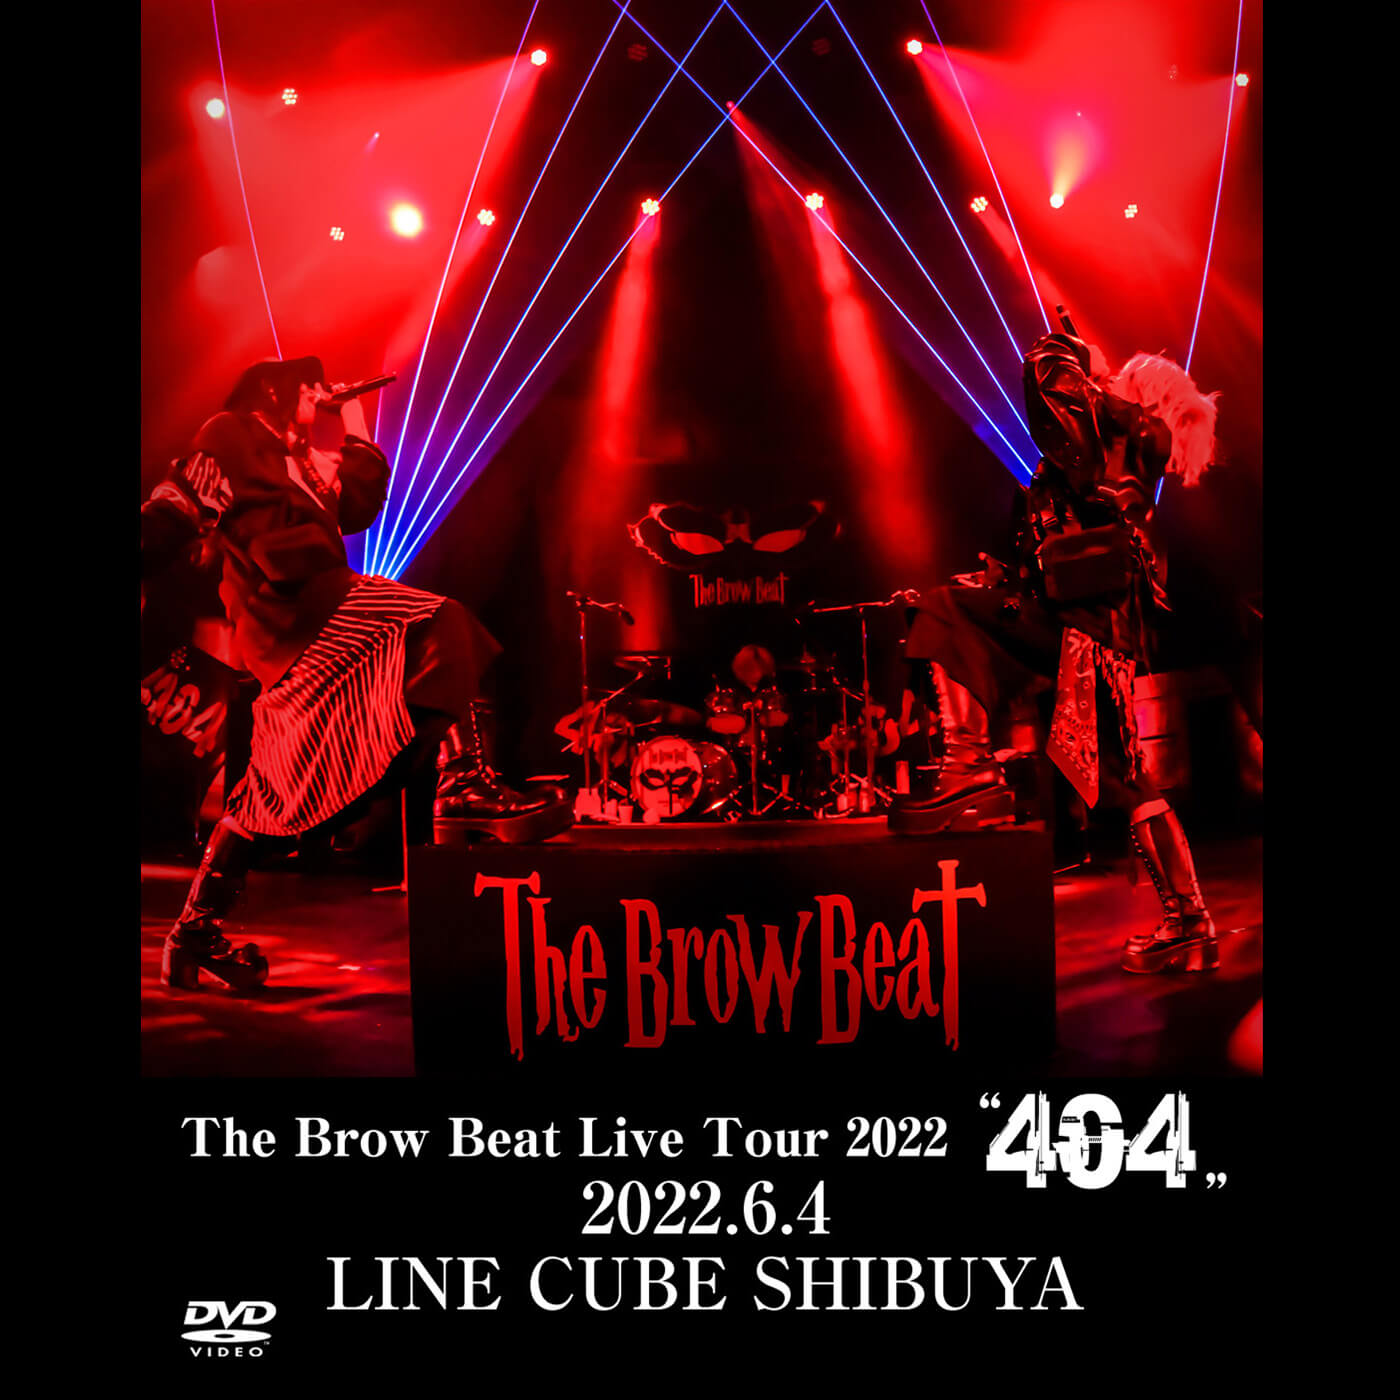 The Brow Beat Live 2022 